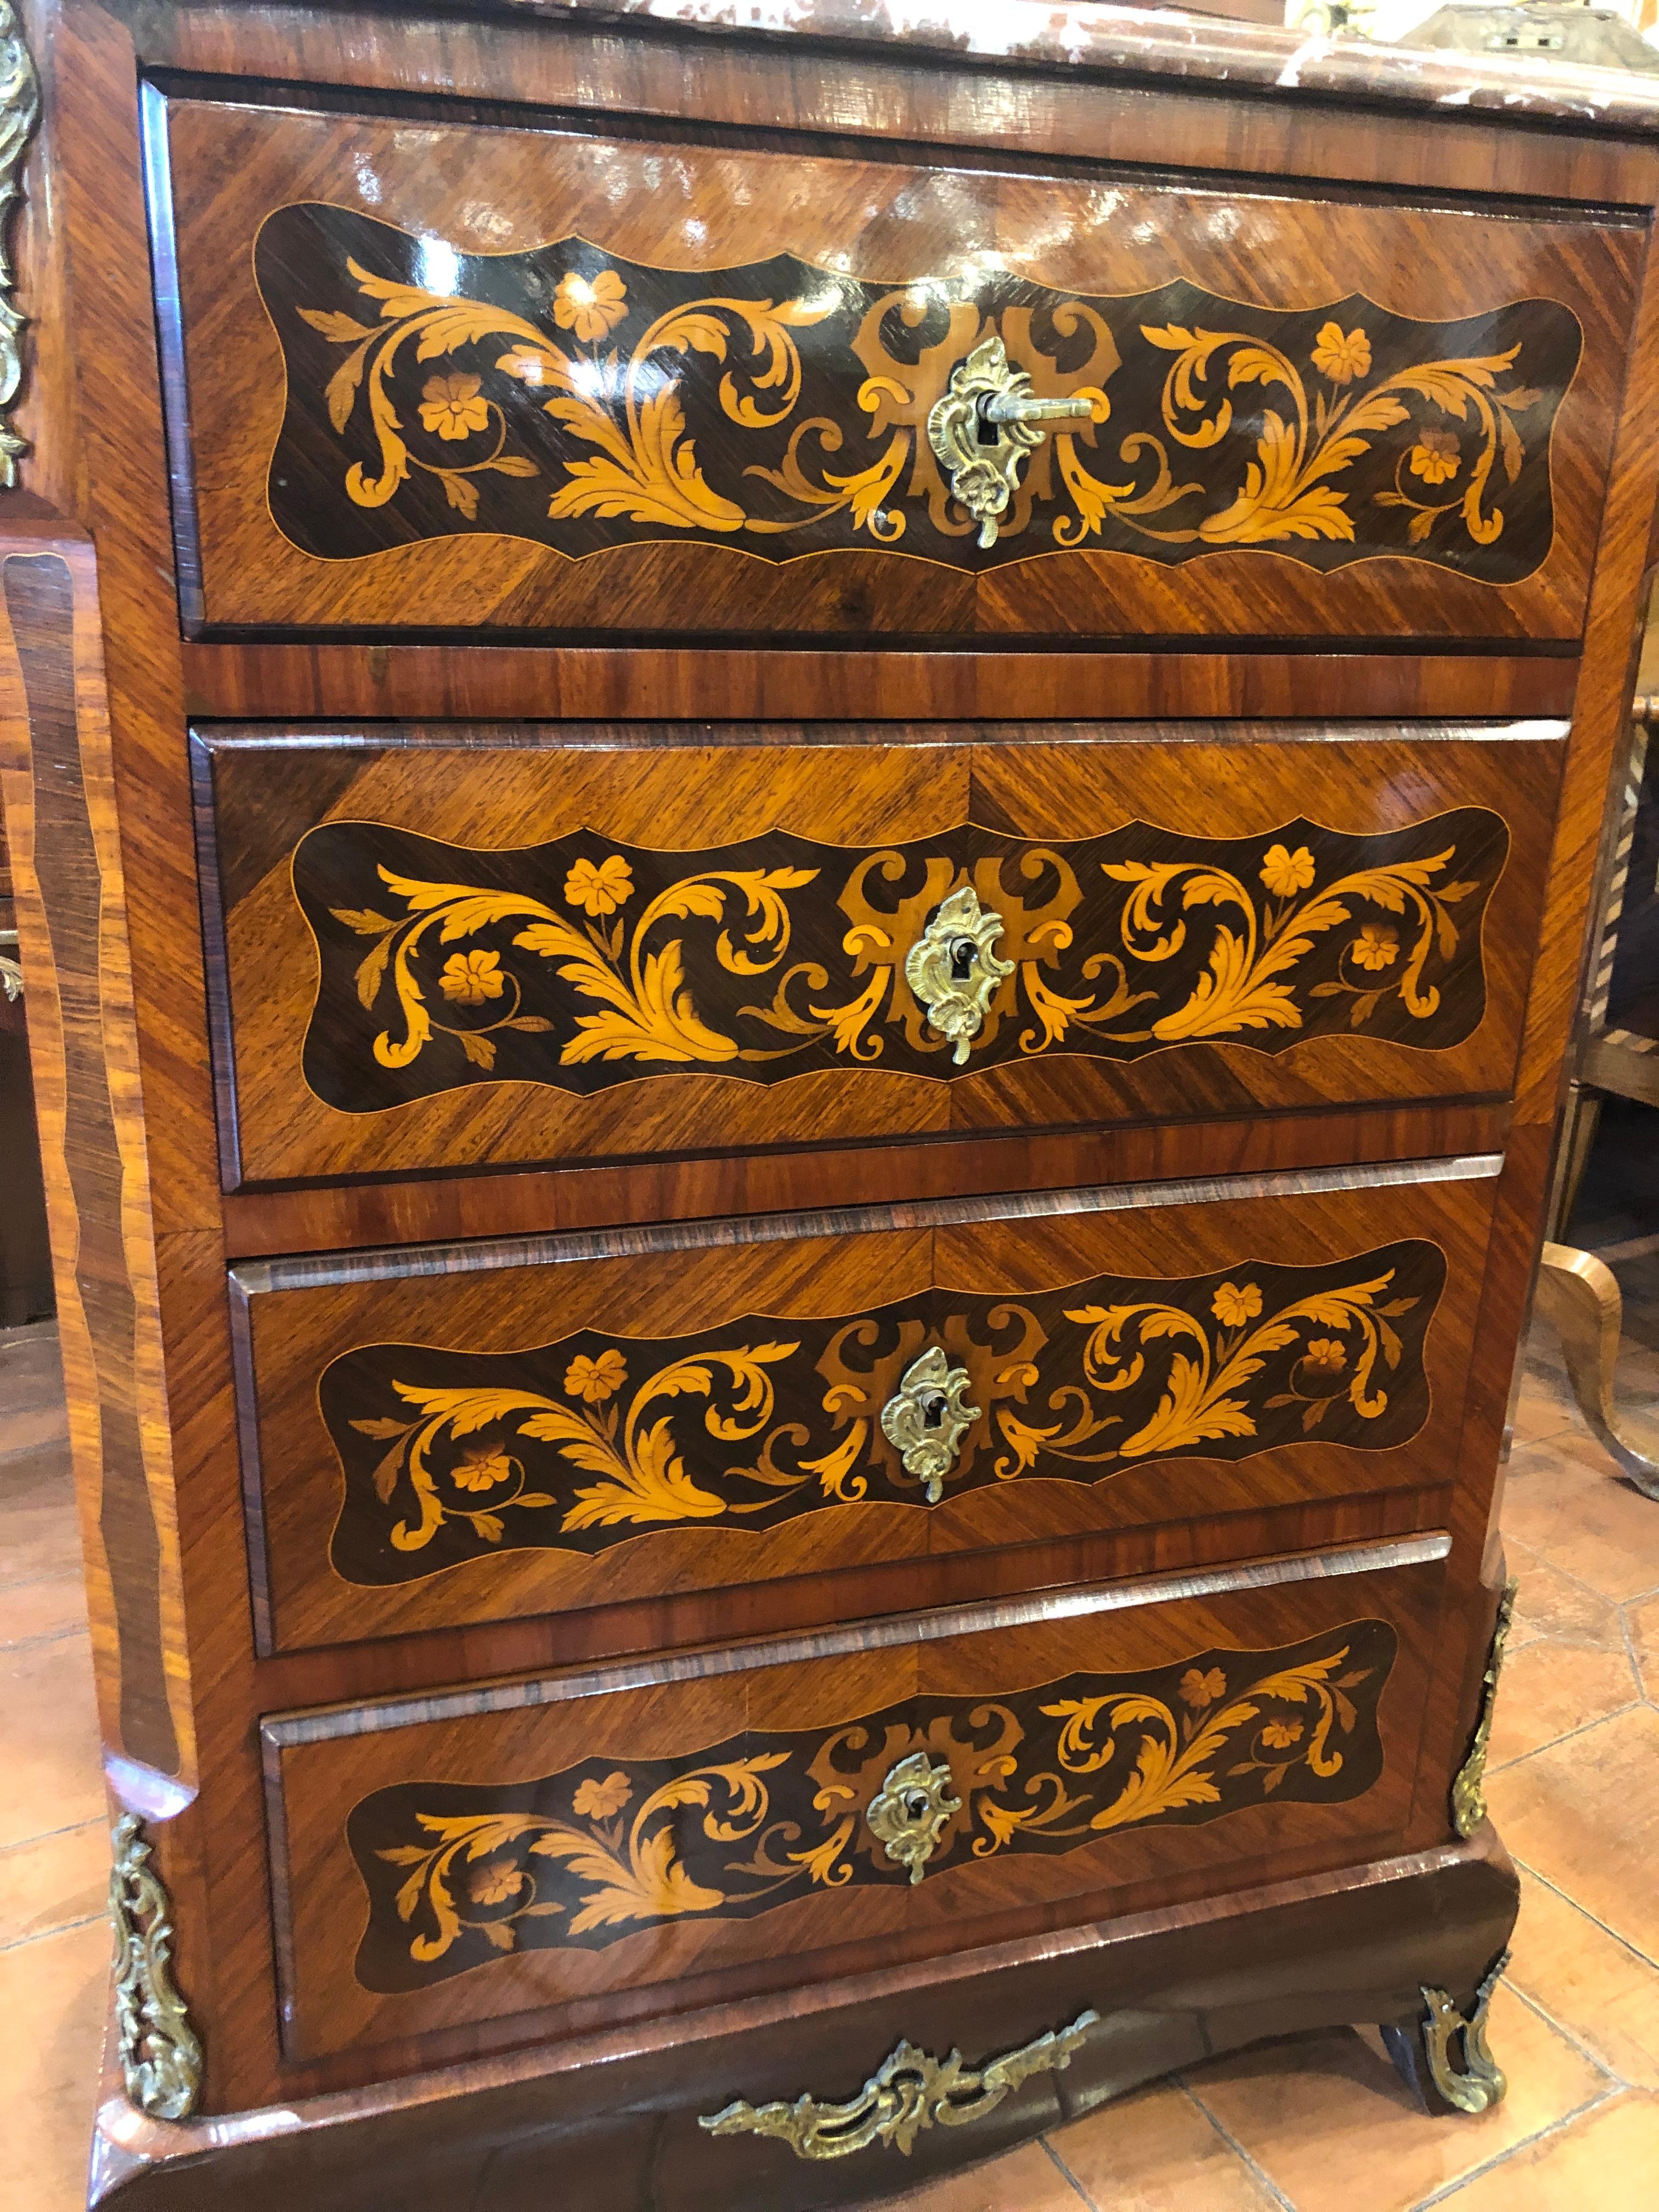 French commander period Napoleon III °, in kingwood and rosewood and inlaid with floral motifs in fruitwood, original marble (repaired of one side) red. Restored and prompt delivery, fantastic measures, its inclusion in various contexts, both in